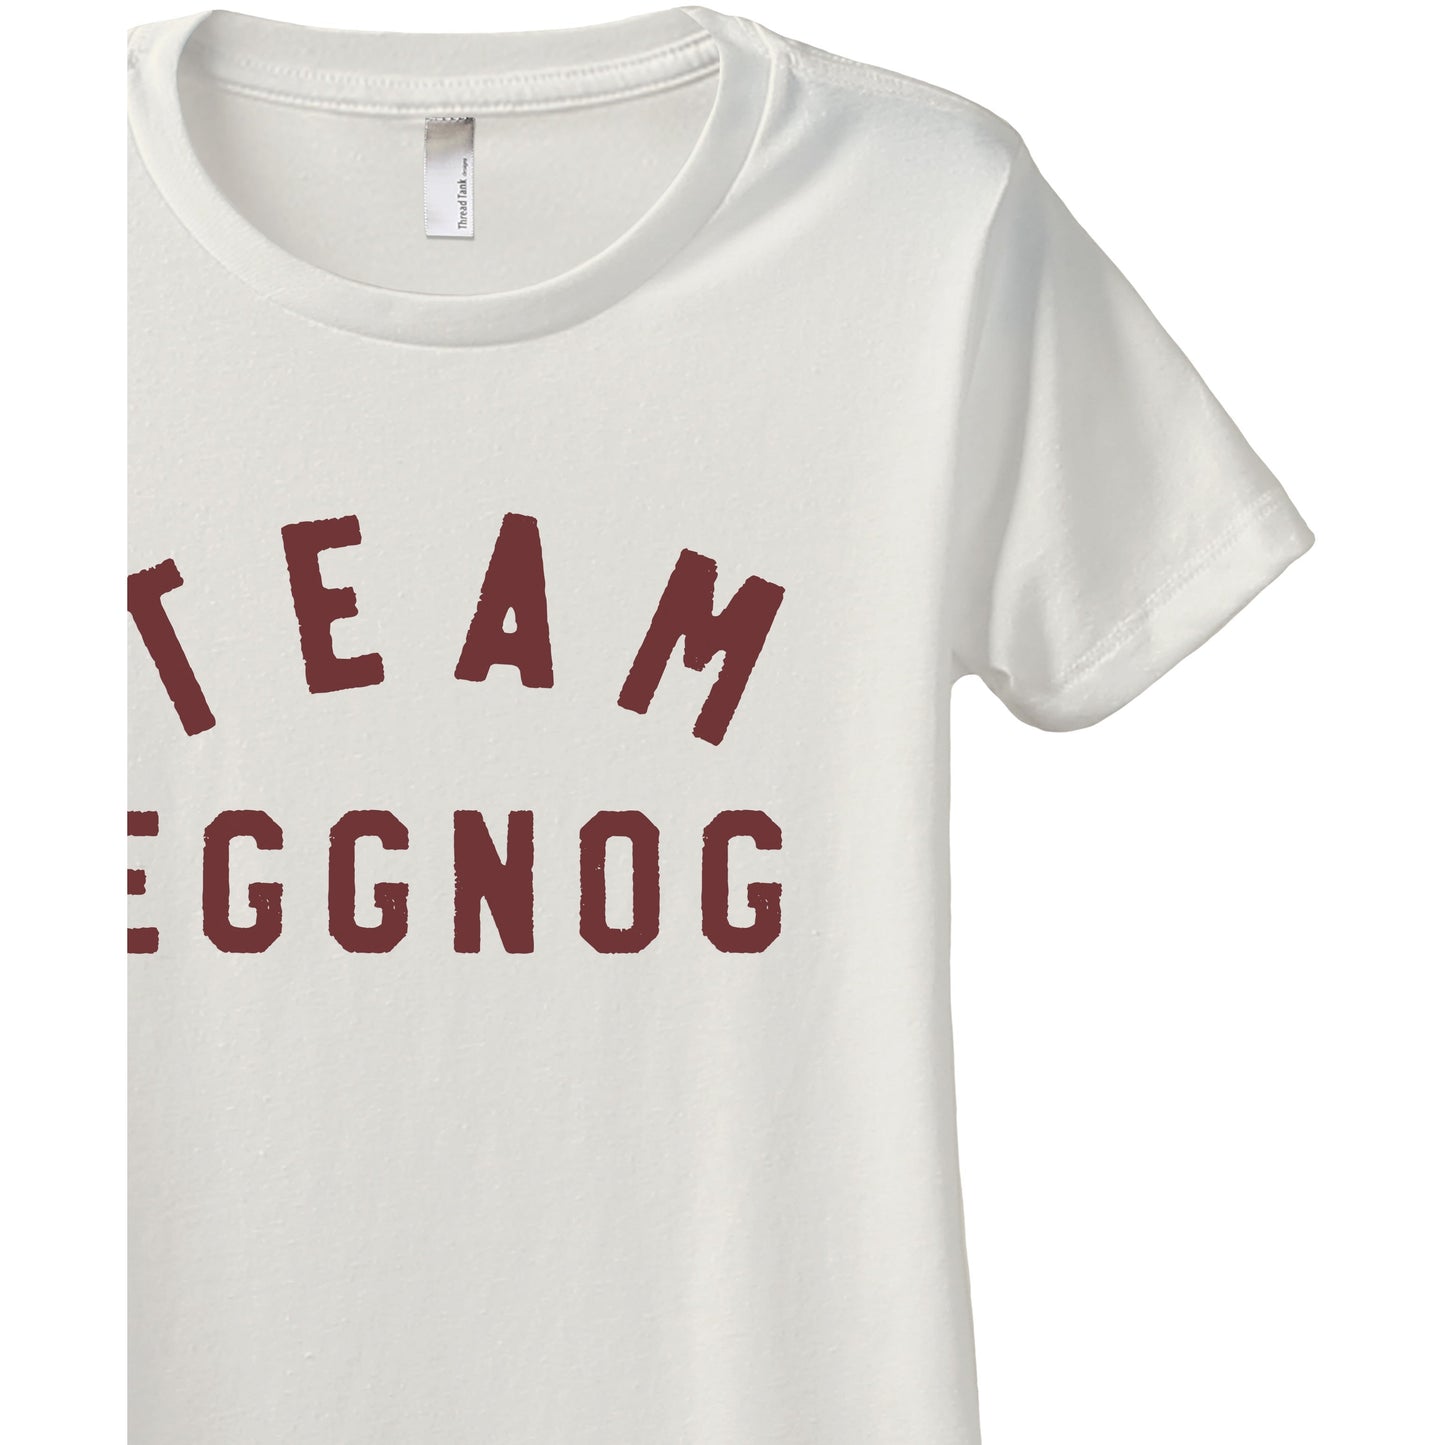 Team Eggnog - Stories You Can Wear